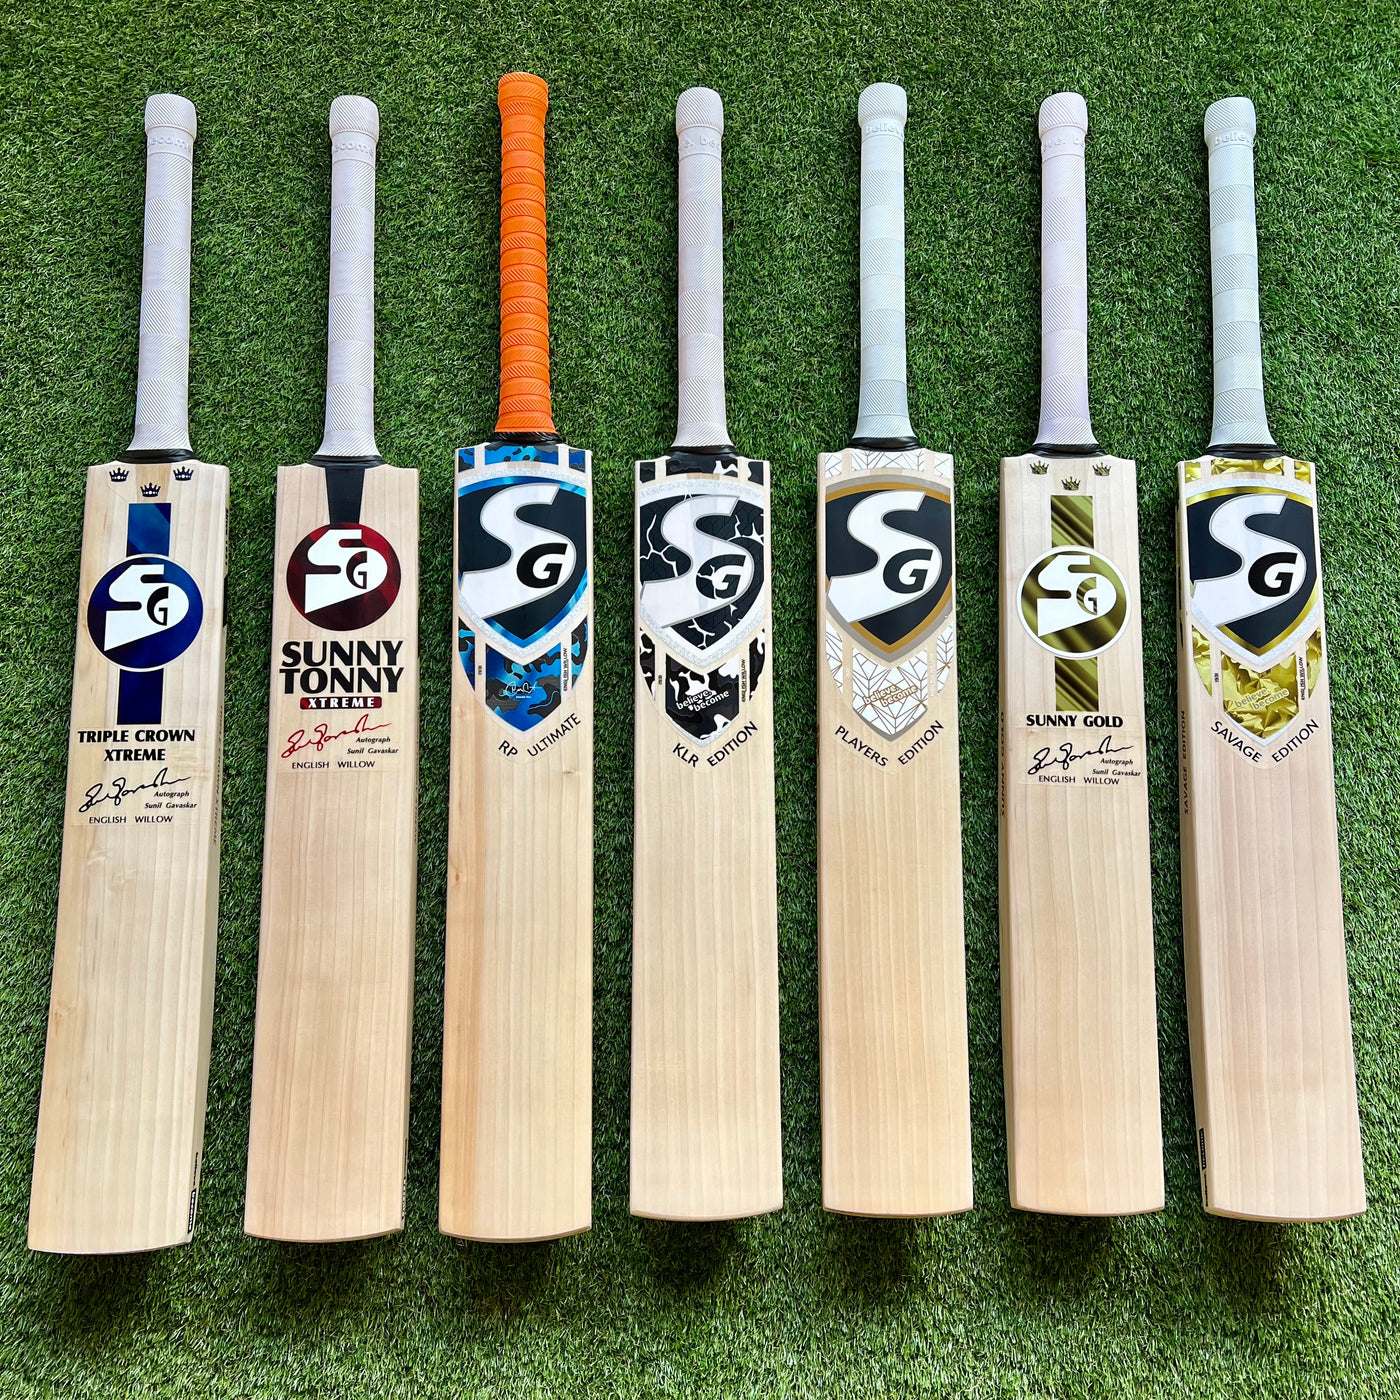 SG Cricket Bats | SG Cricket | SG Cricket Bats in UK | Next Day Delivery | SG Cricket Sale